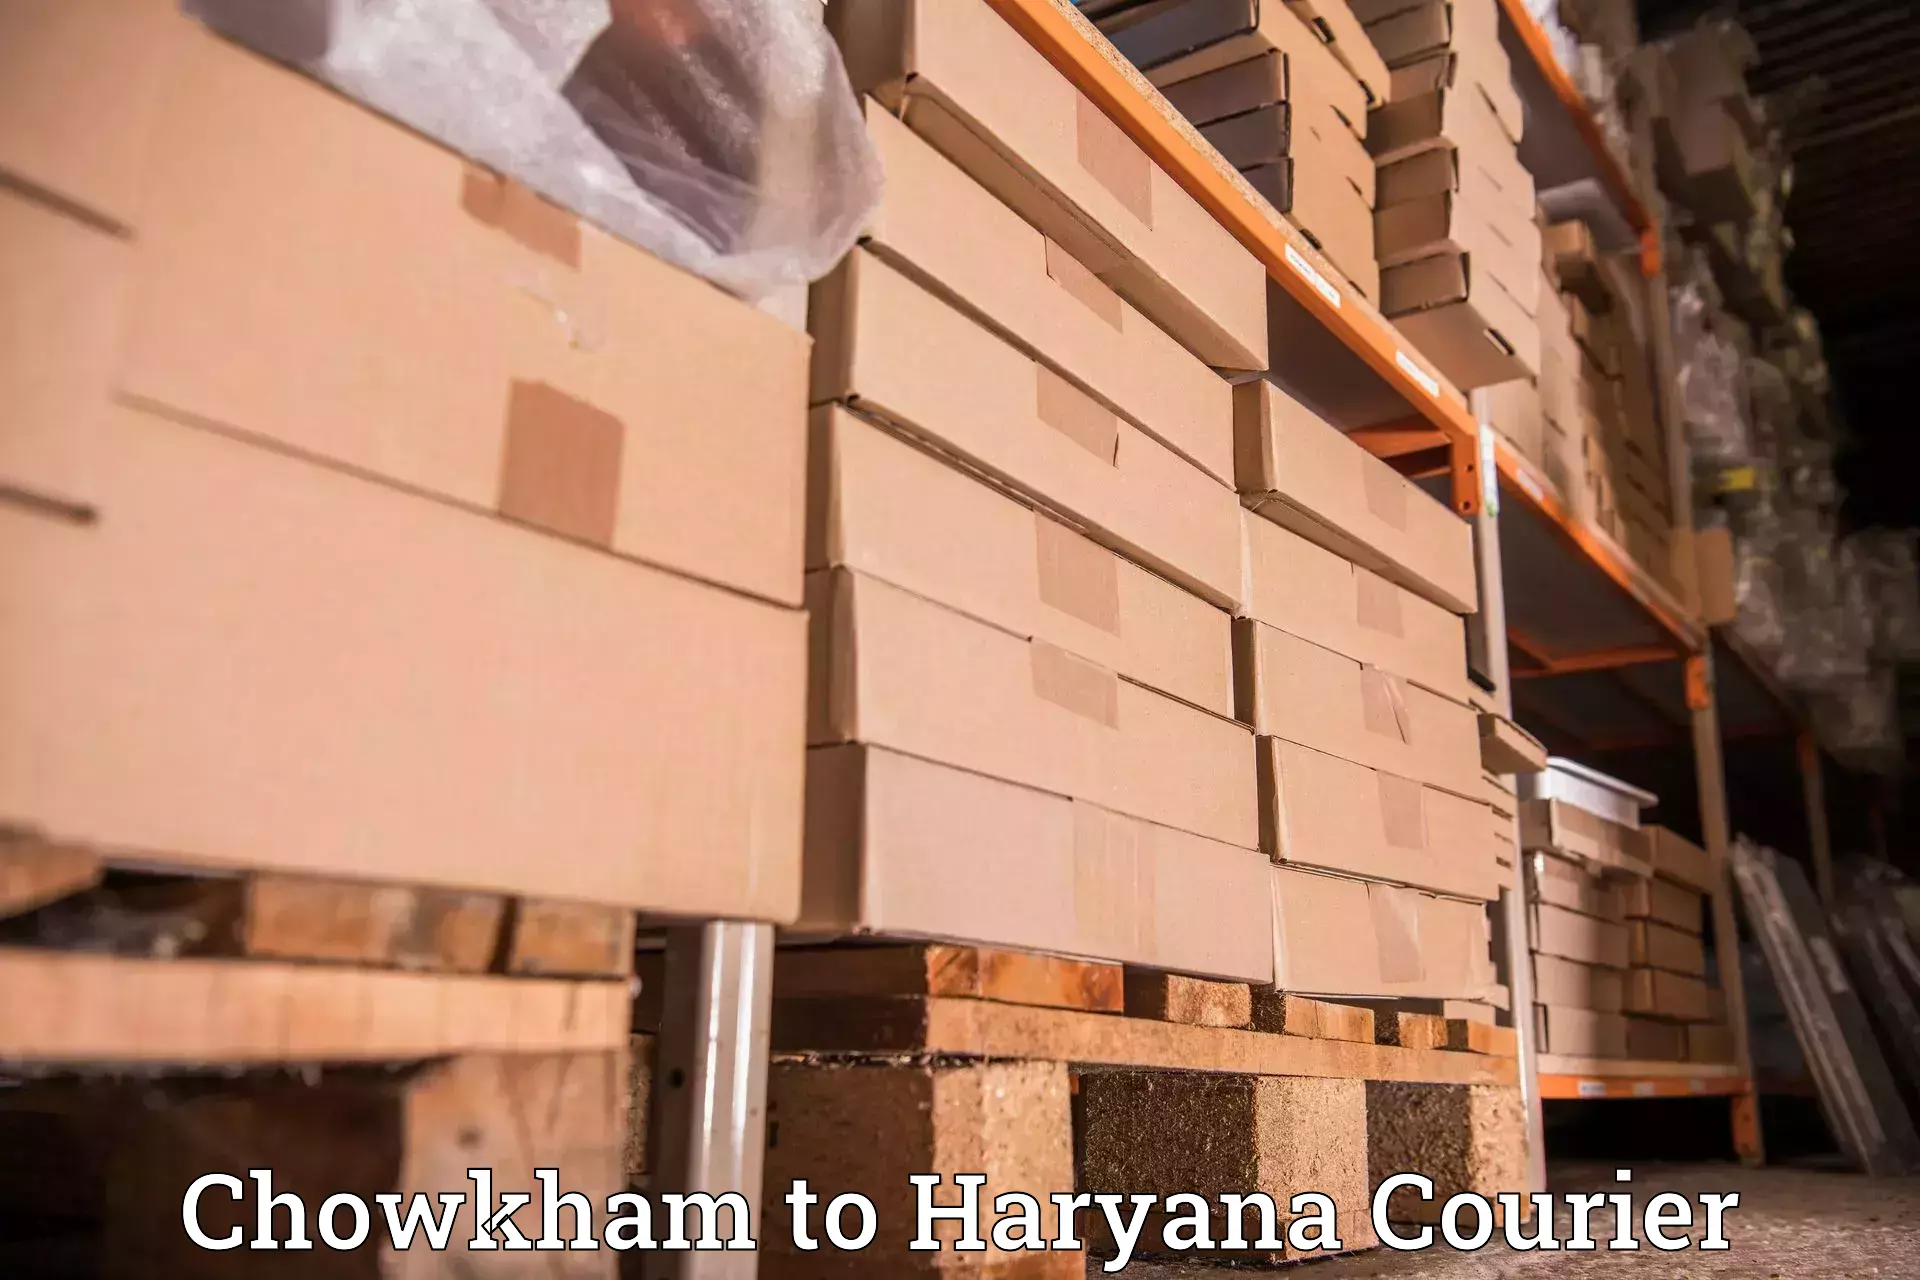 Ground shipping in Chowkham to Sirsa